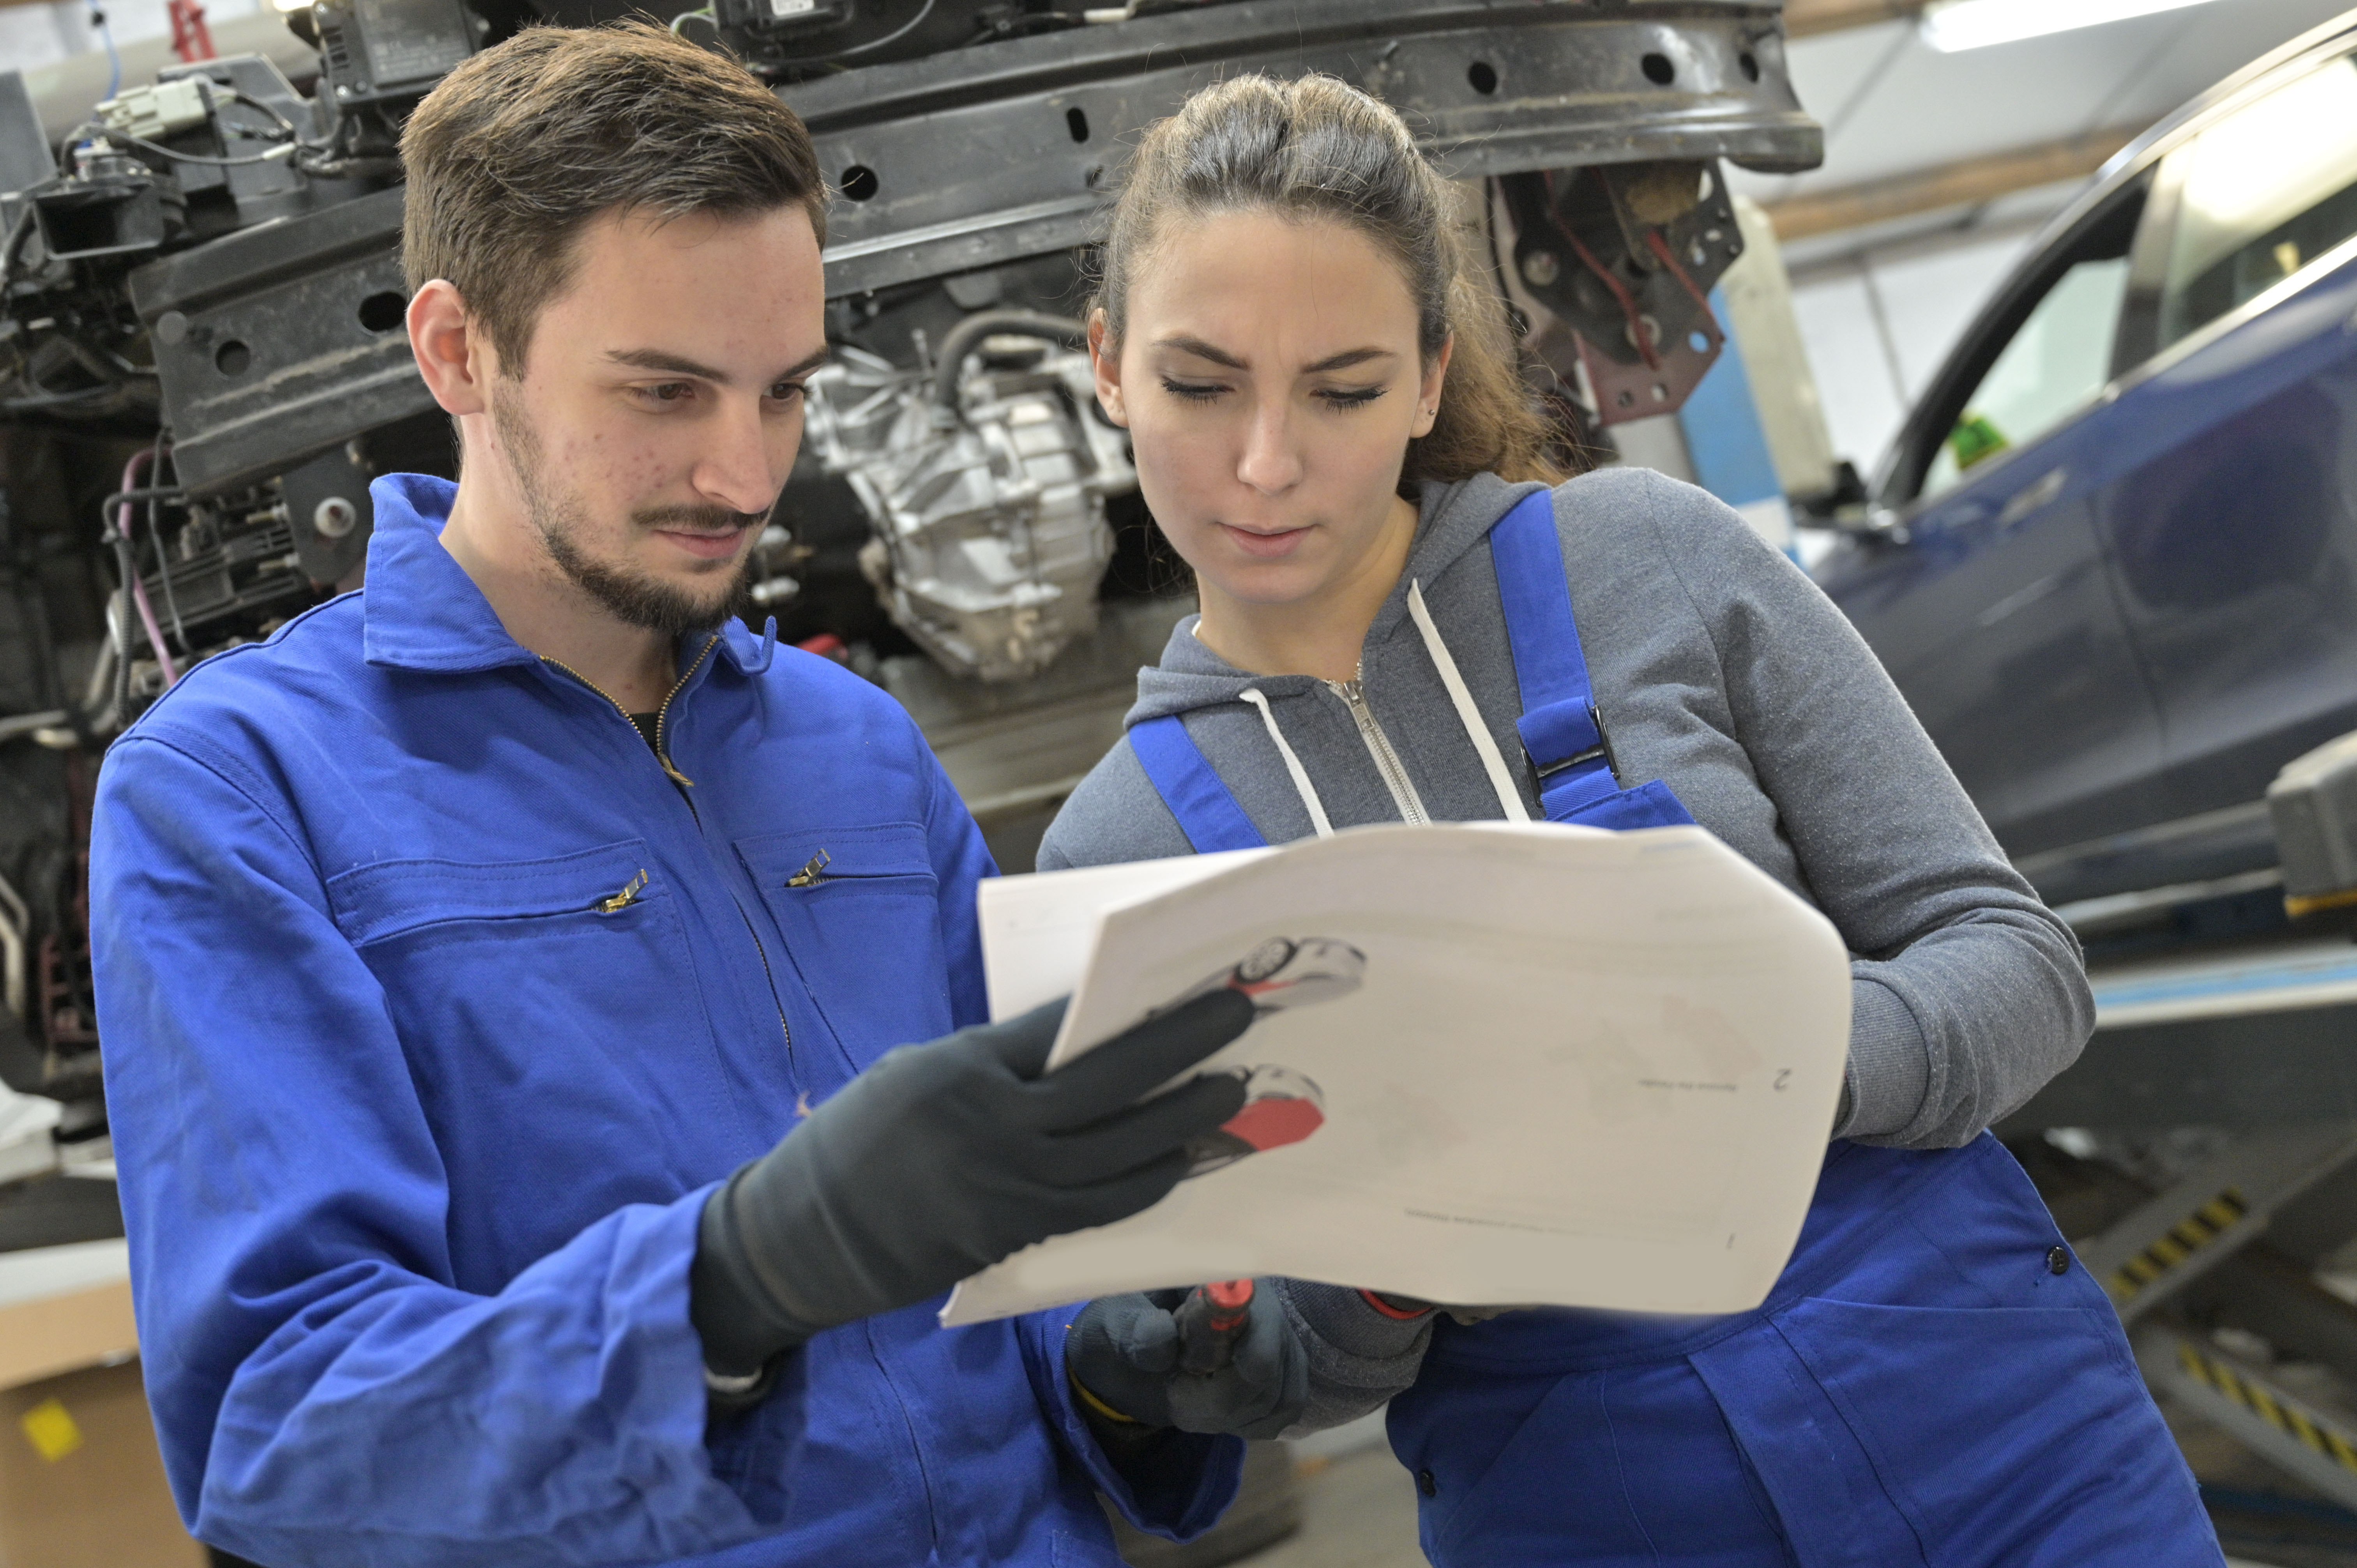 Young man and woman reviewing auto design plans in a shop.